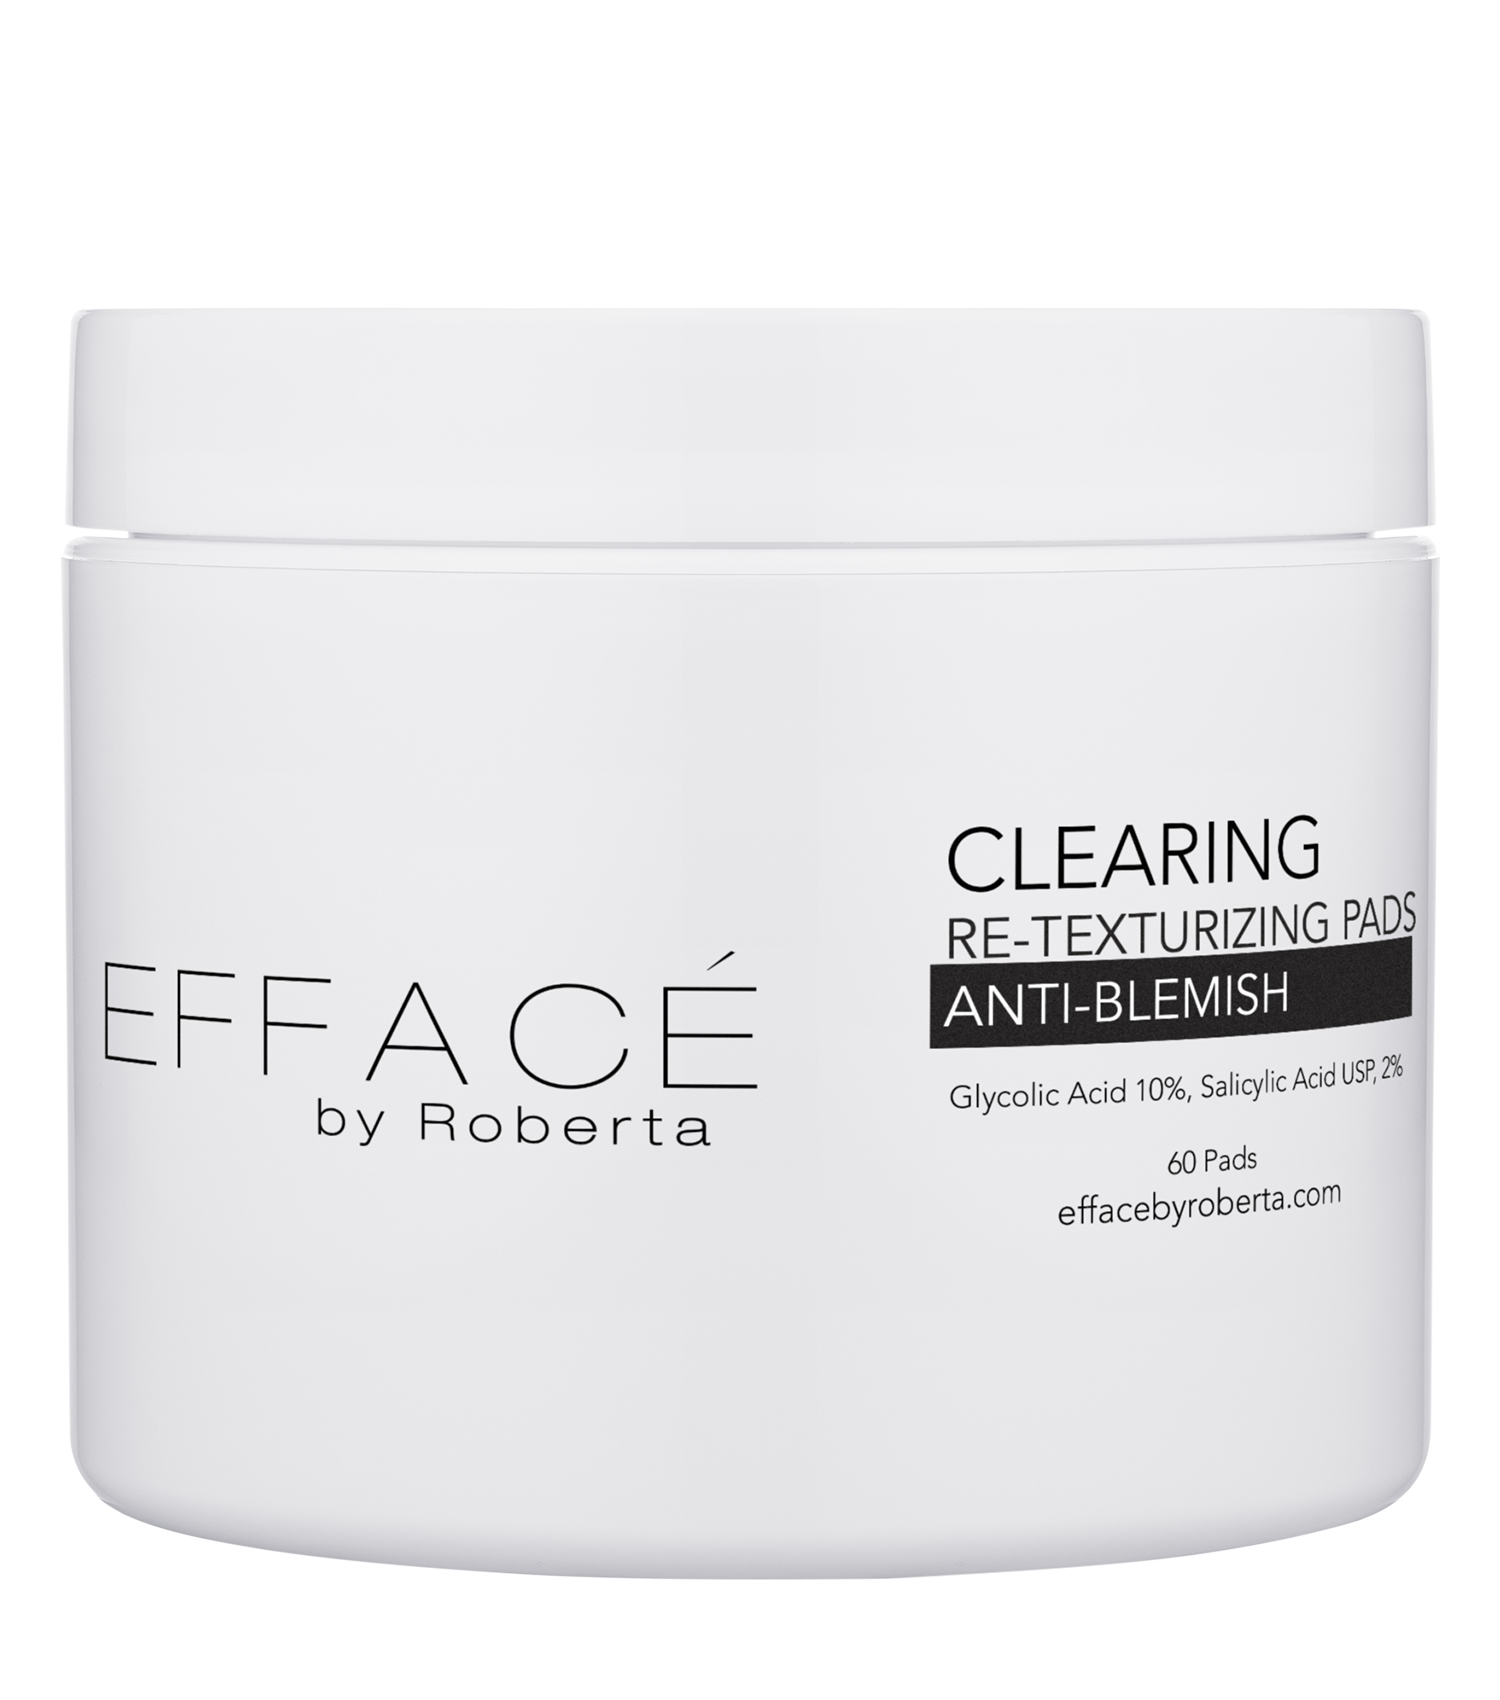 EFFACE Aesthetics Clearing Re-Texturizing Pads